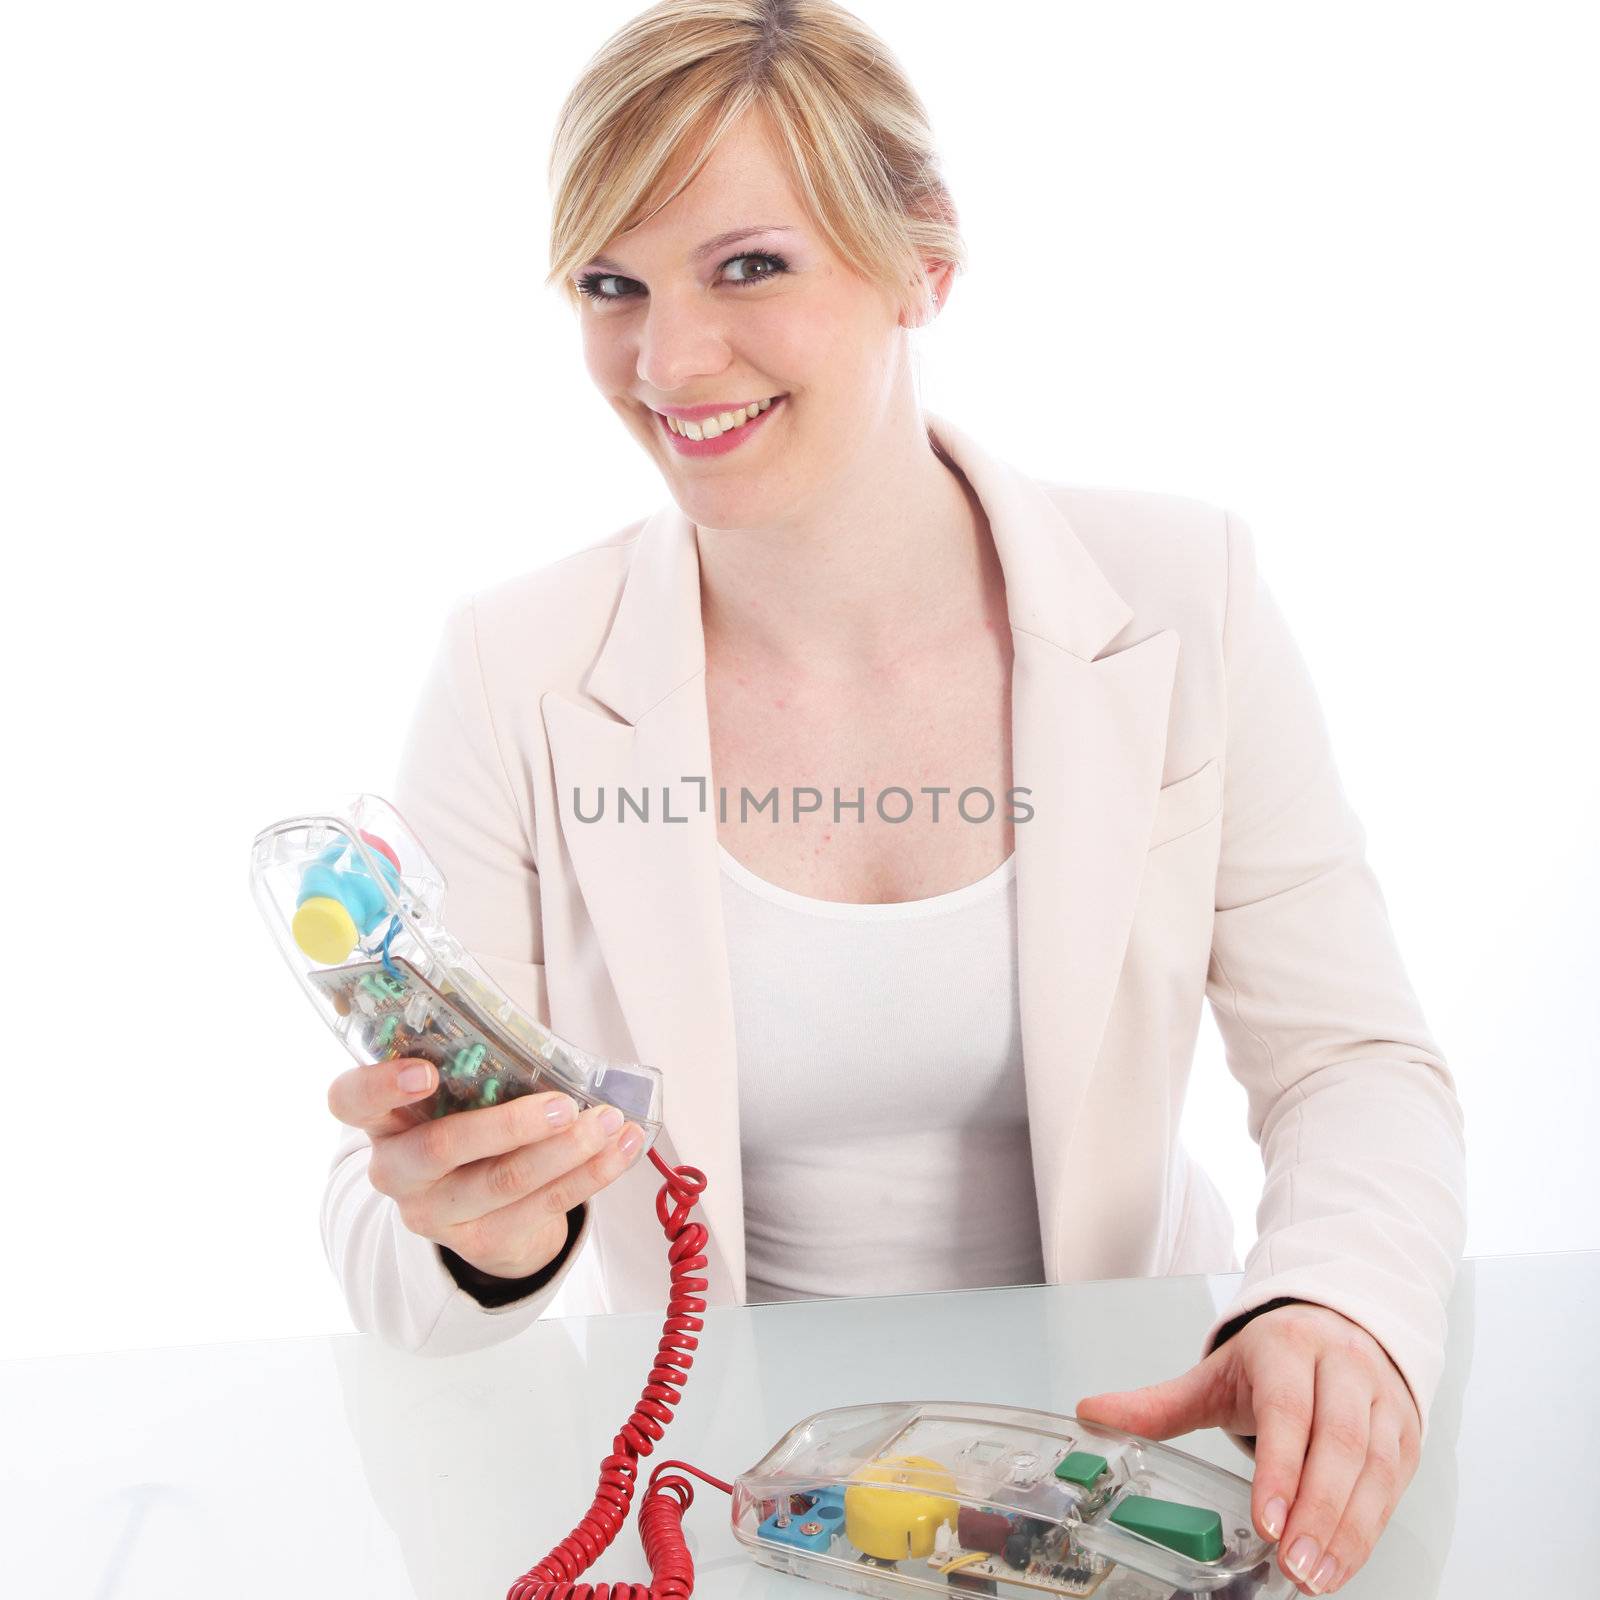 Smiling woman using a landline telephone with a bright red cord and modern transparent instrument